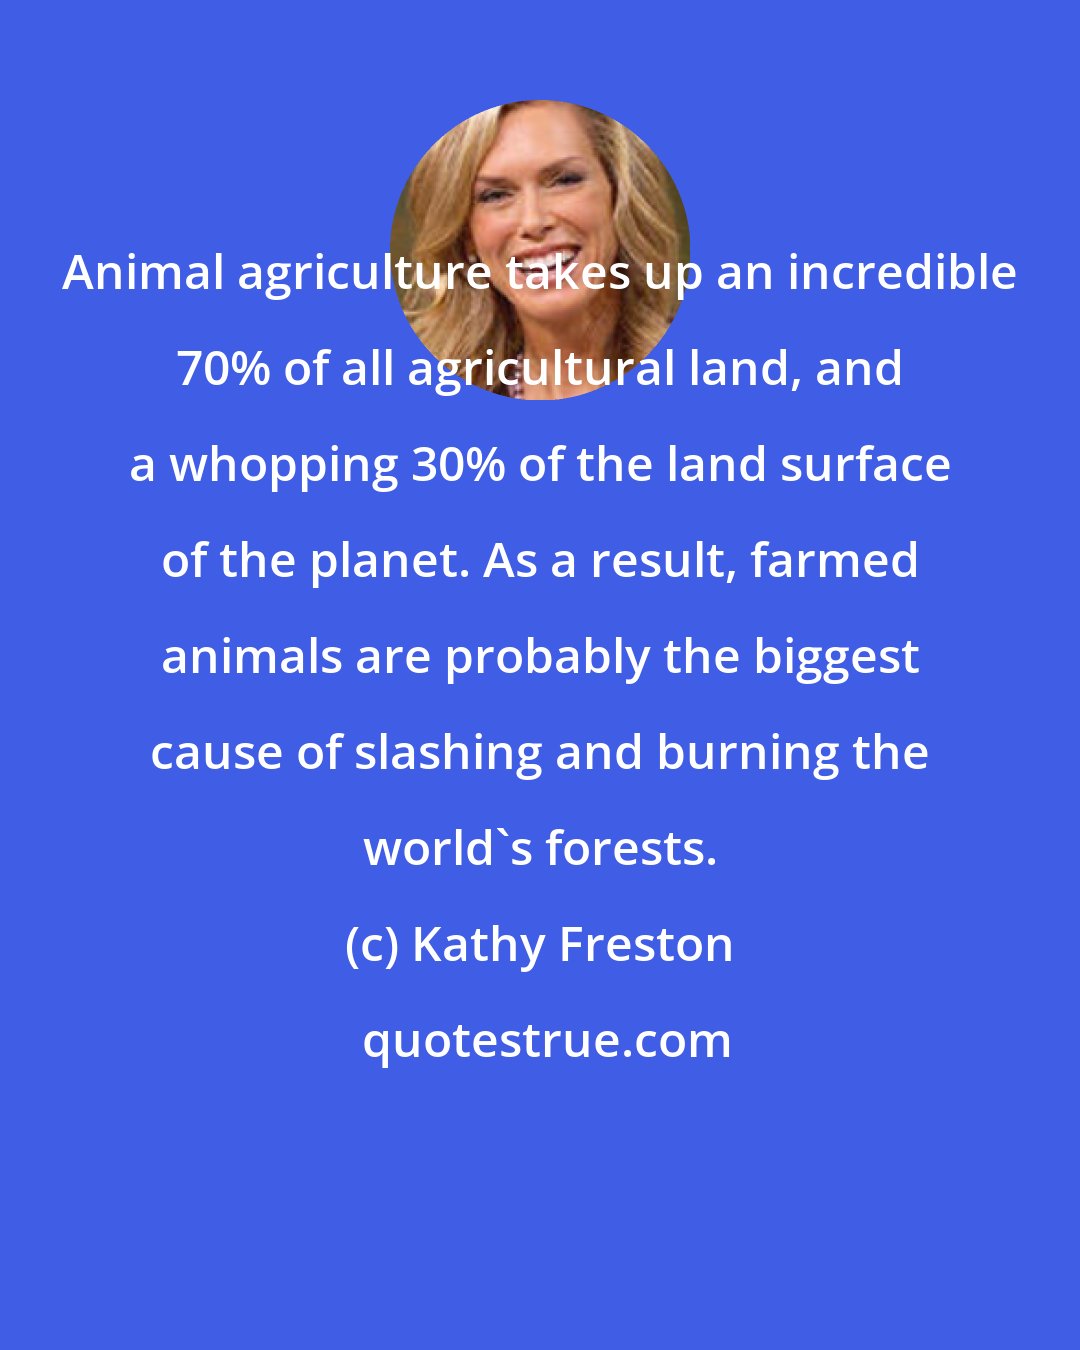 Kathy Freston: Animal agriculture takes up an incredible 70% of all agricultural land, and a whopping 30% of the land surface of the planet. As a result, farmed animals are probably the biggest cause of slashing and burning the world's forests.